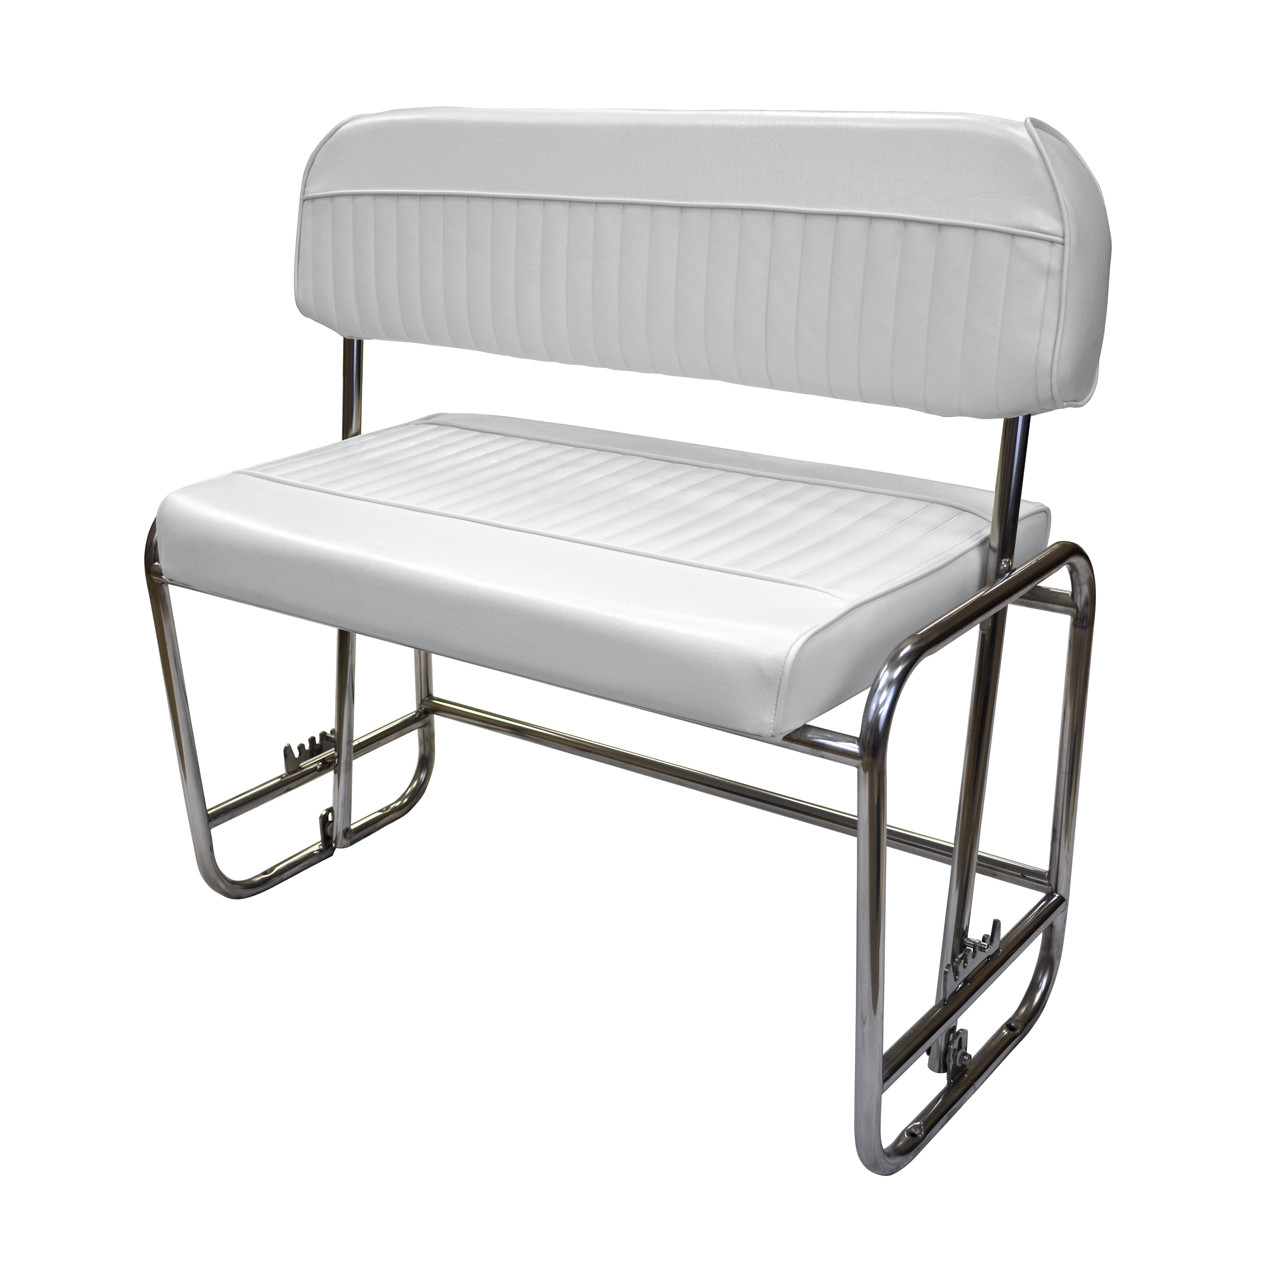 Wise Boat Cooler Seat - Swingback Frame WD155P